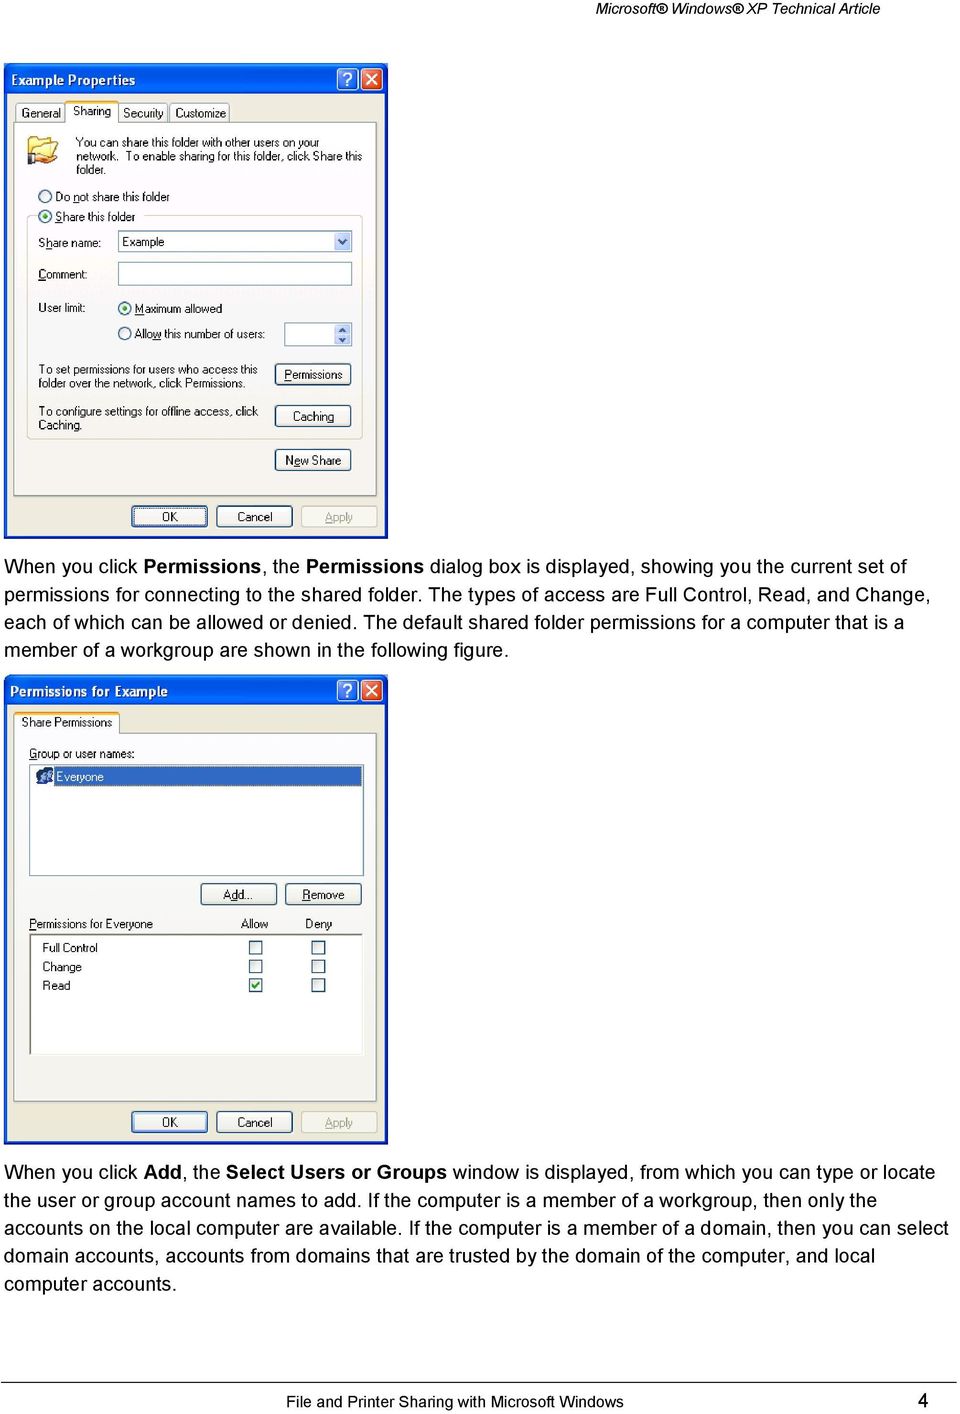 The default shared folder permissions for a computer that is a member of a workgroup are shown in the following figure.